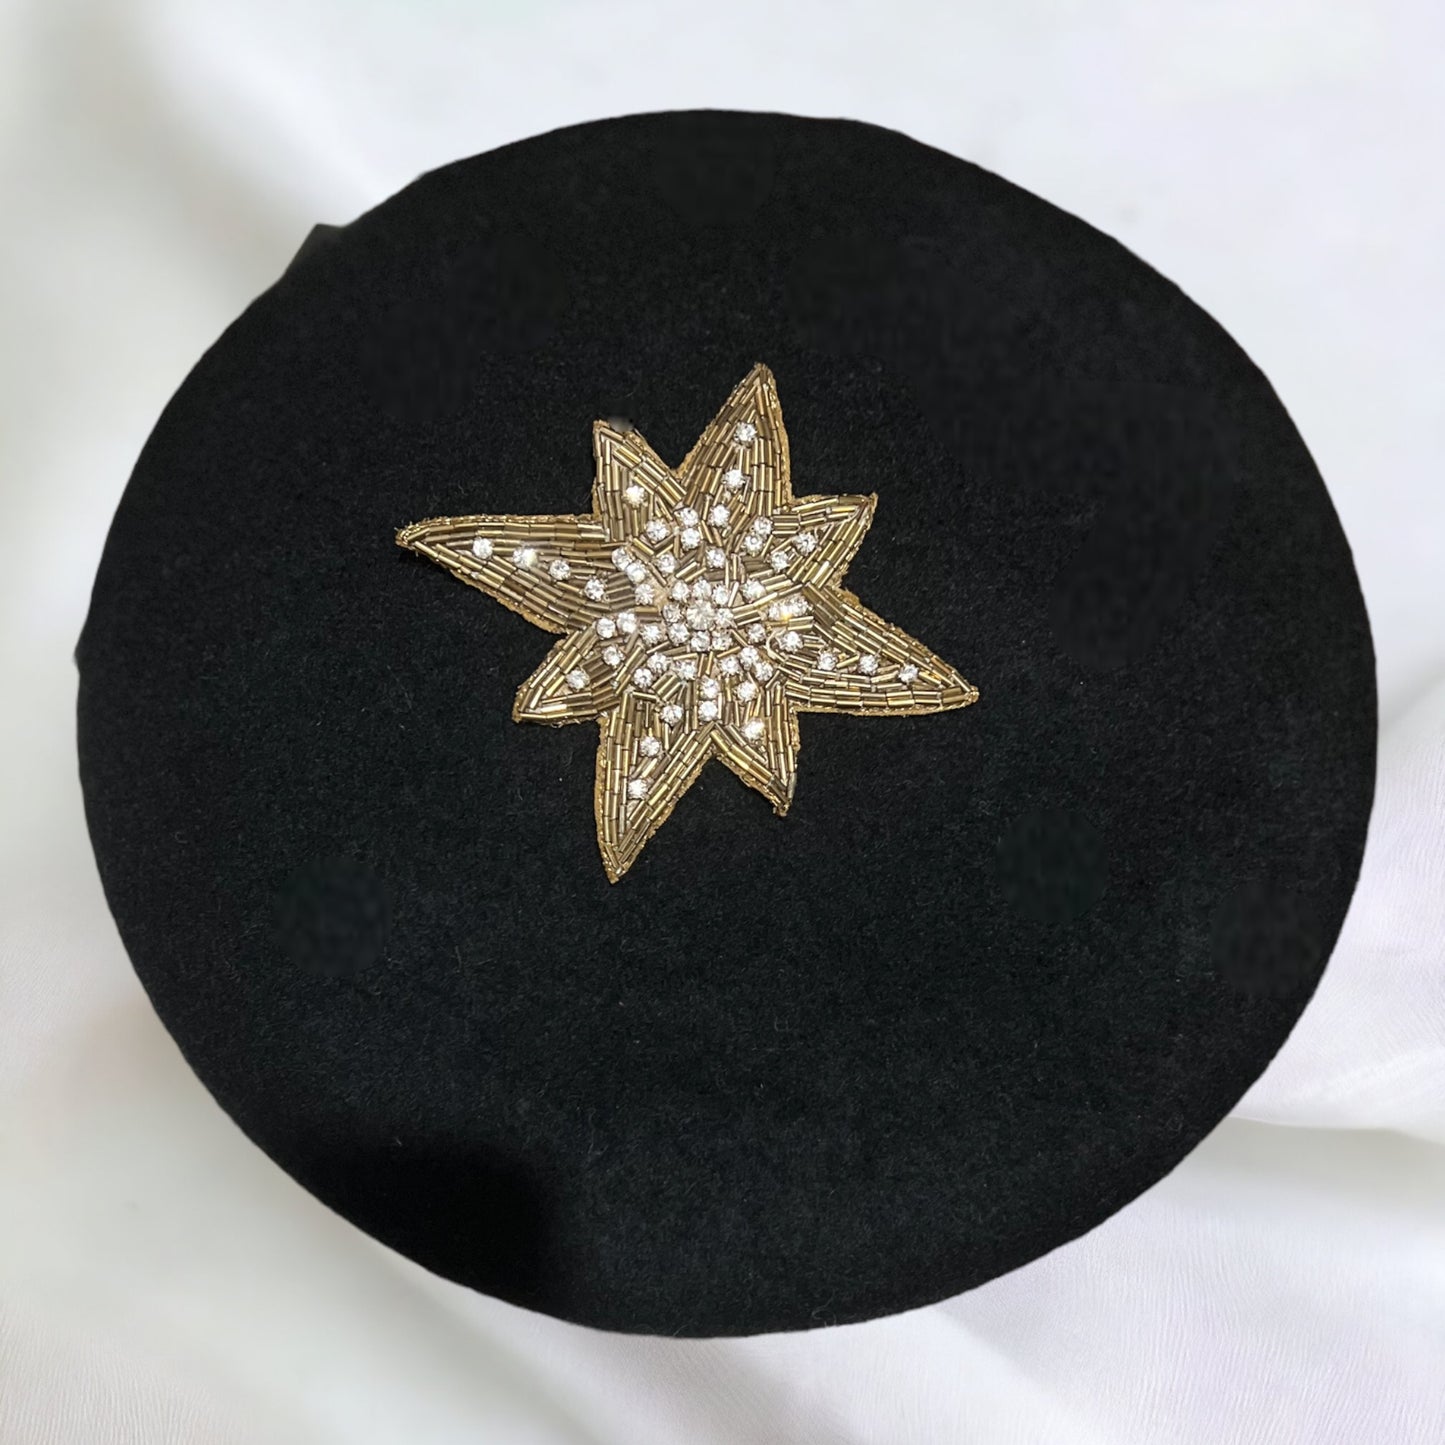 Gold star beret limited edition